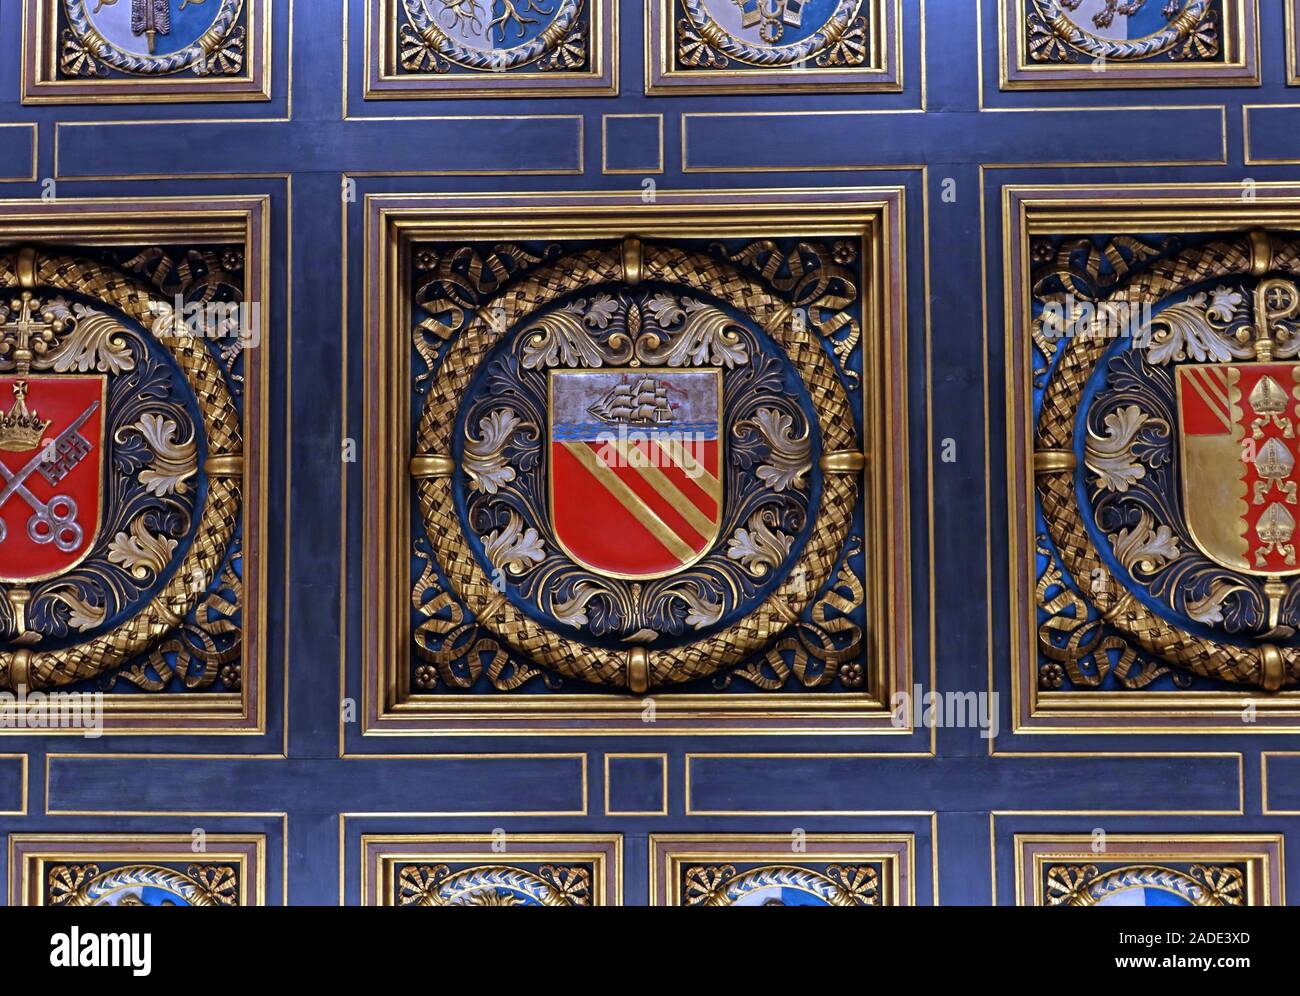 Manchester Central Library - City crest from entrance ceiling,arms and crests of the Duchy of Lancaster, the See of York, the See of Manchester Stock Photo